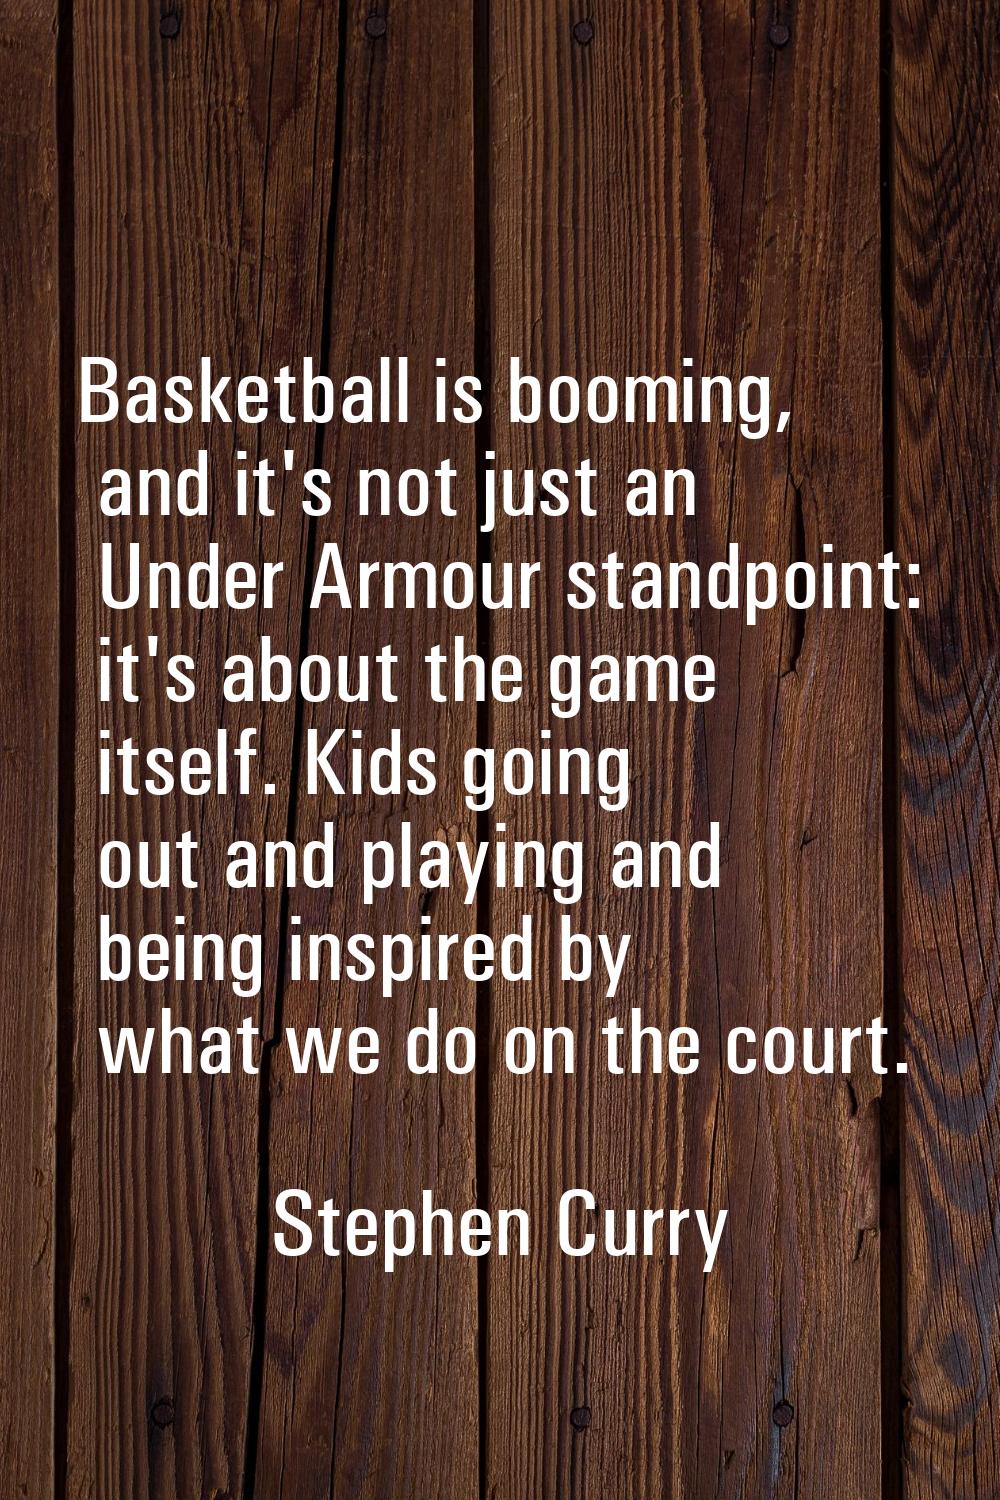 Basketball is booming, and it's not just an Under Armour standpoint: it's about the game itself. Ki